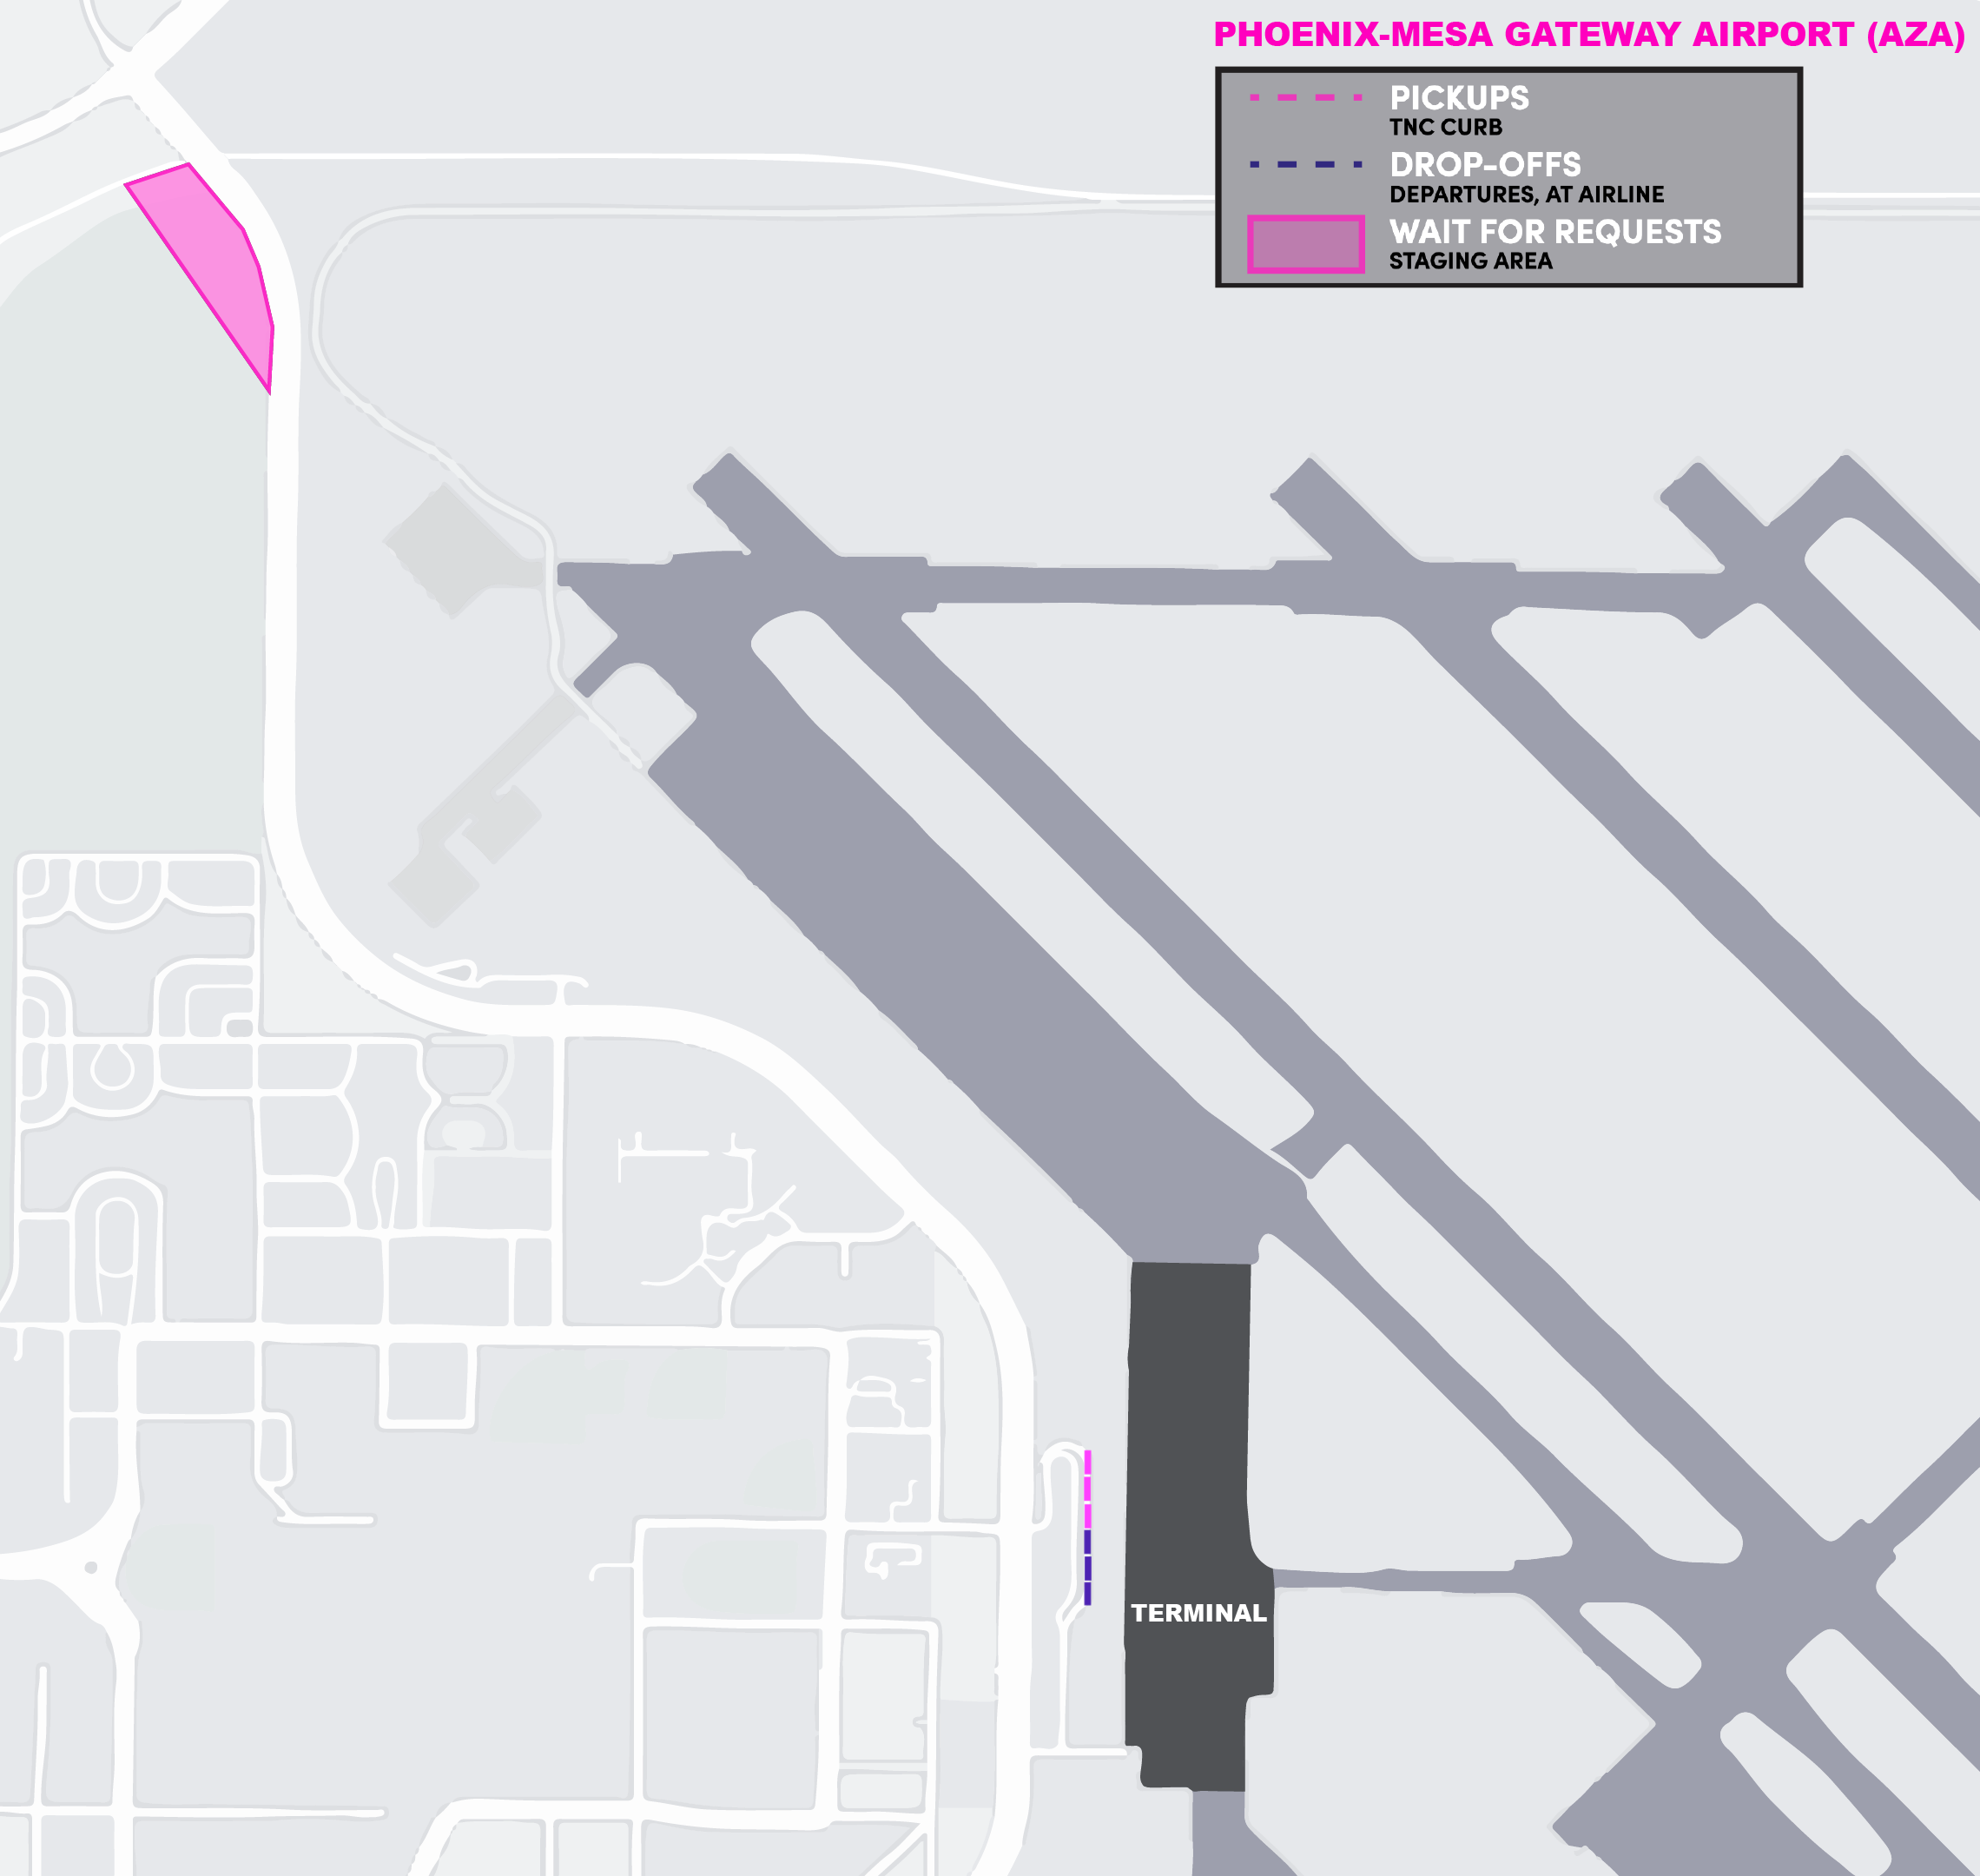 This image is a map of the AZA airport. It includes staging lot, pickup, and drop-off areas.